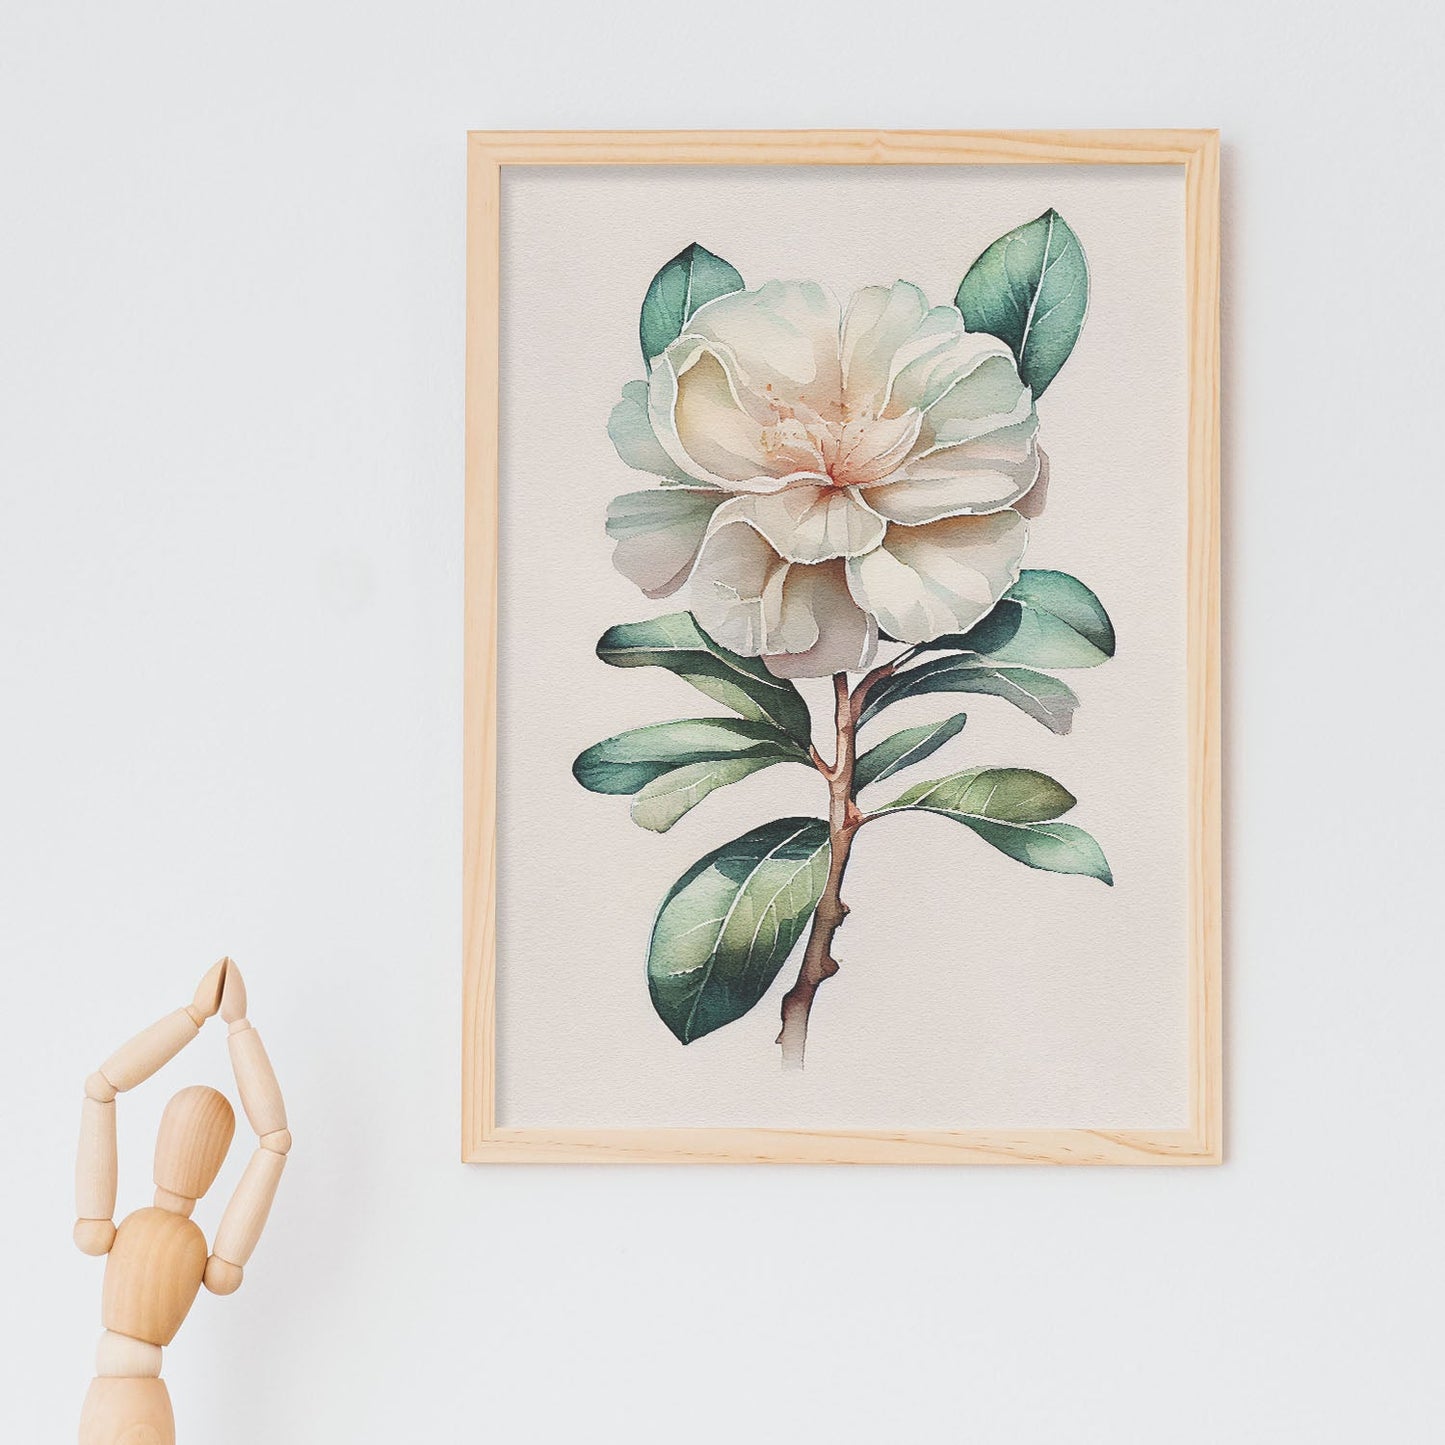 Nacnic watercolor minmal Camellia_1. Aesthetic Wall Art Prints for Bedroom or Living Room Design.